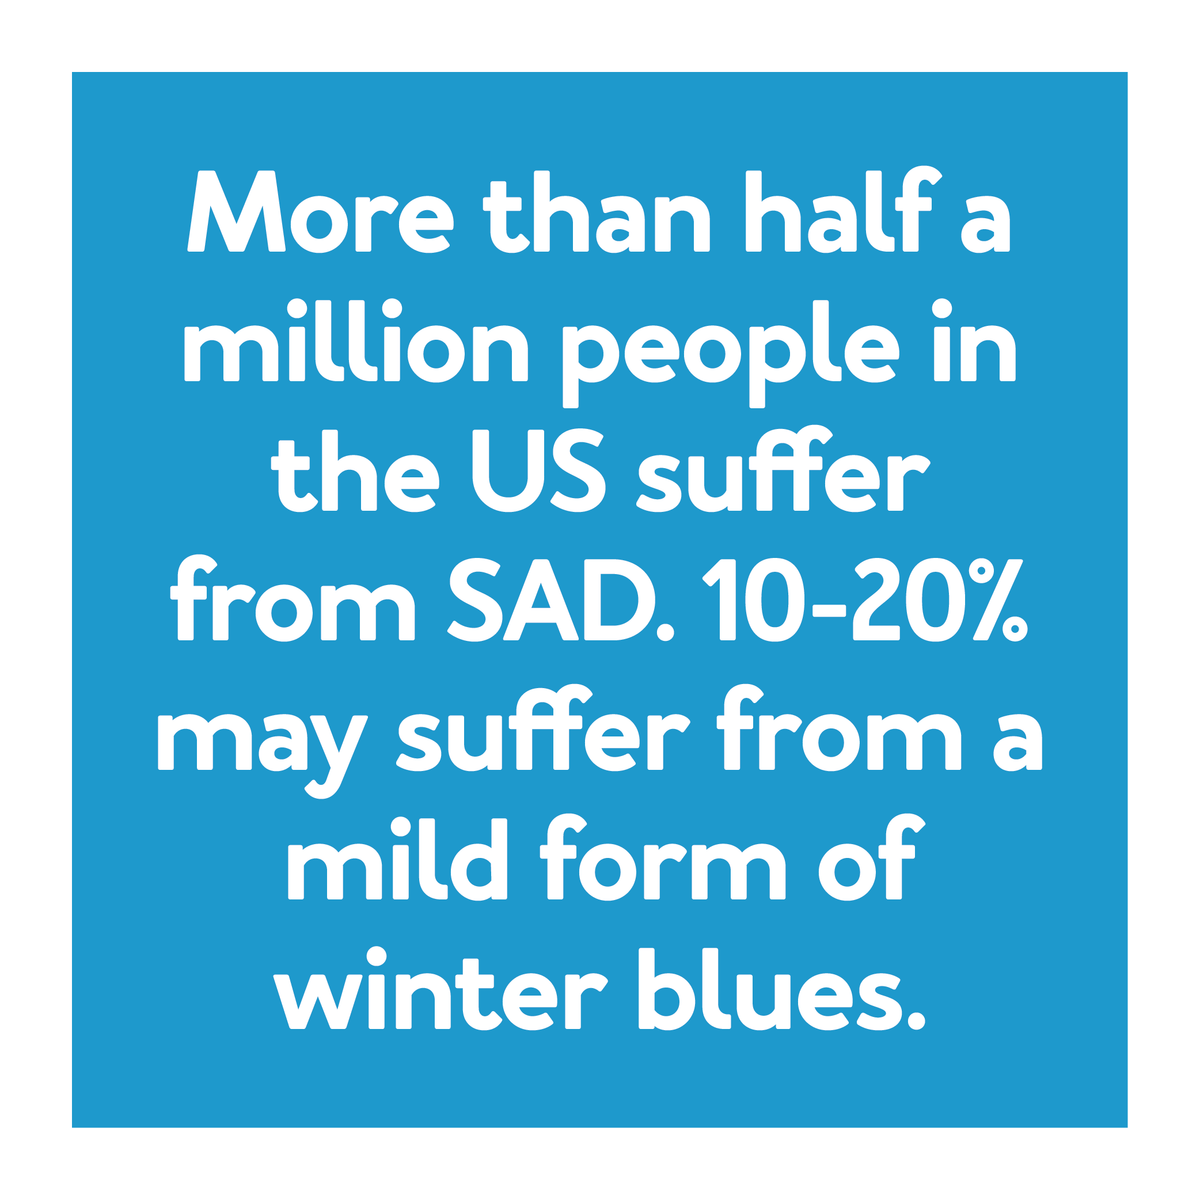 Graphics text ,more than half a million people the US suffer from SAD 10-20% may suffer from a mild form of winter blues